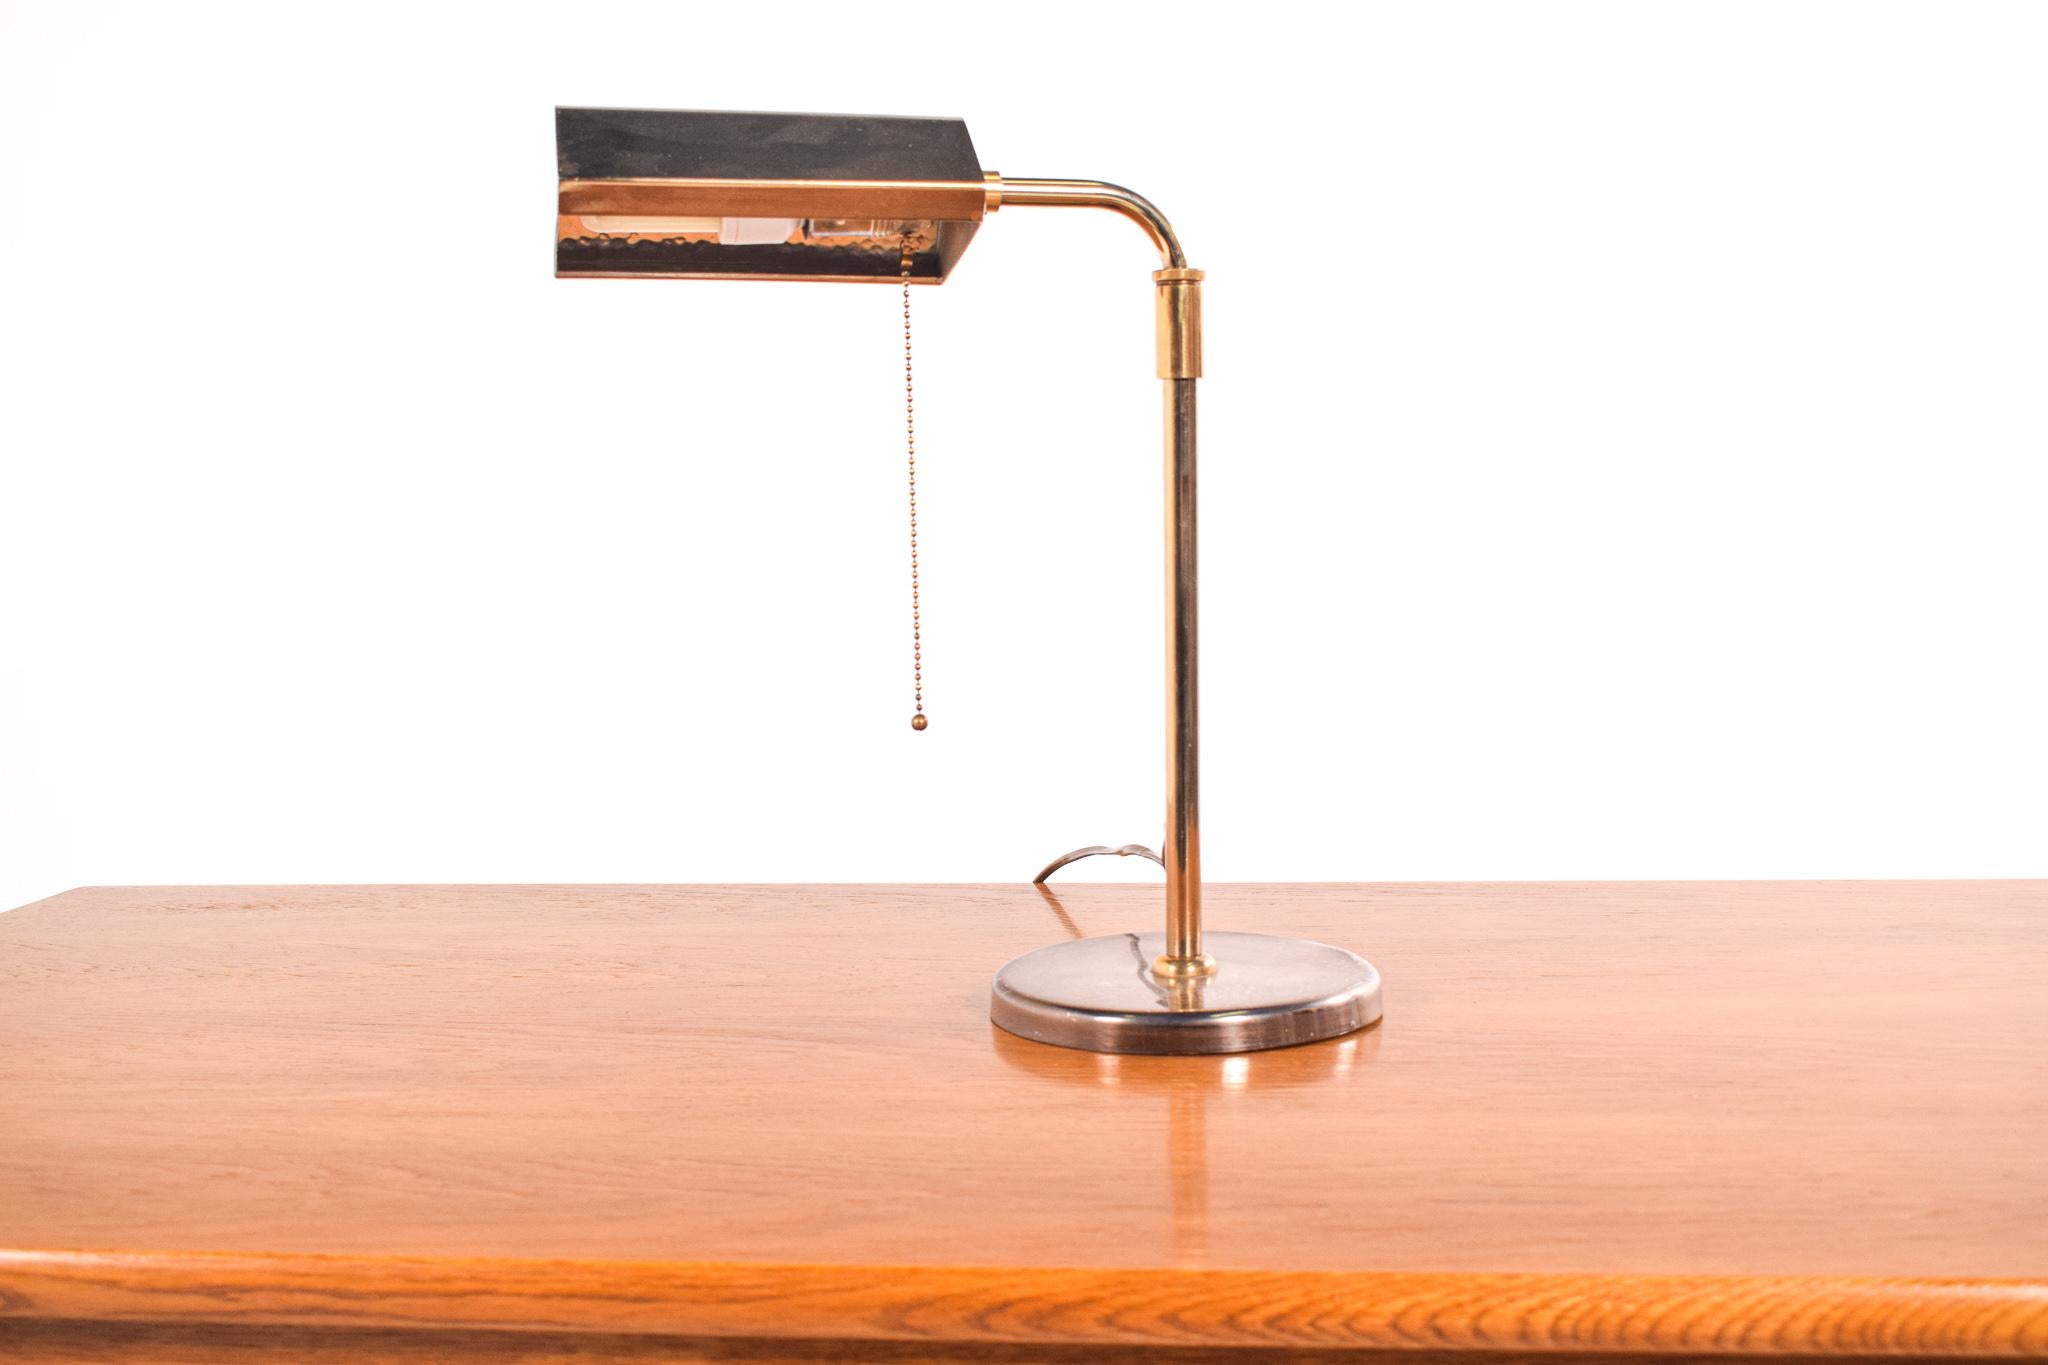 Adjustable desk lamp made by Keknudt, round base, brushed brass. Period: 1970s, 1980s – Hollywood Regency. Manufacturer by Deknudt Lighting. Deknudt Lighting is a family owned business since 1956 and started by Armand Deknudt with the production of